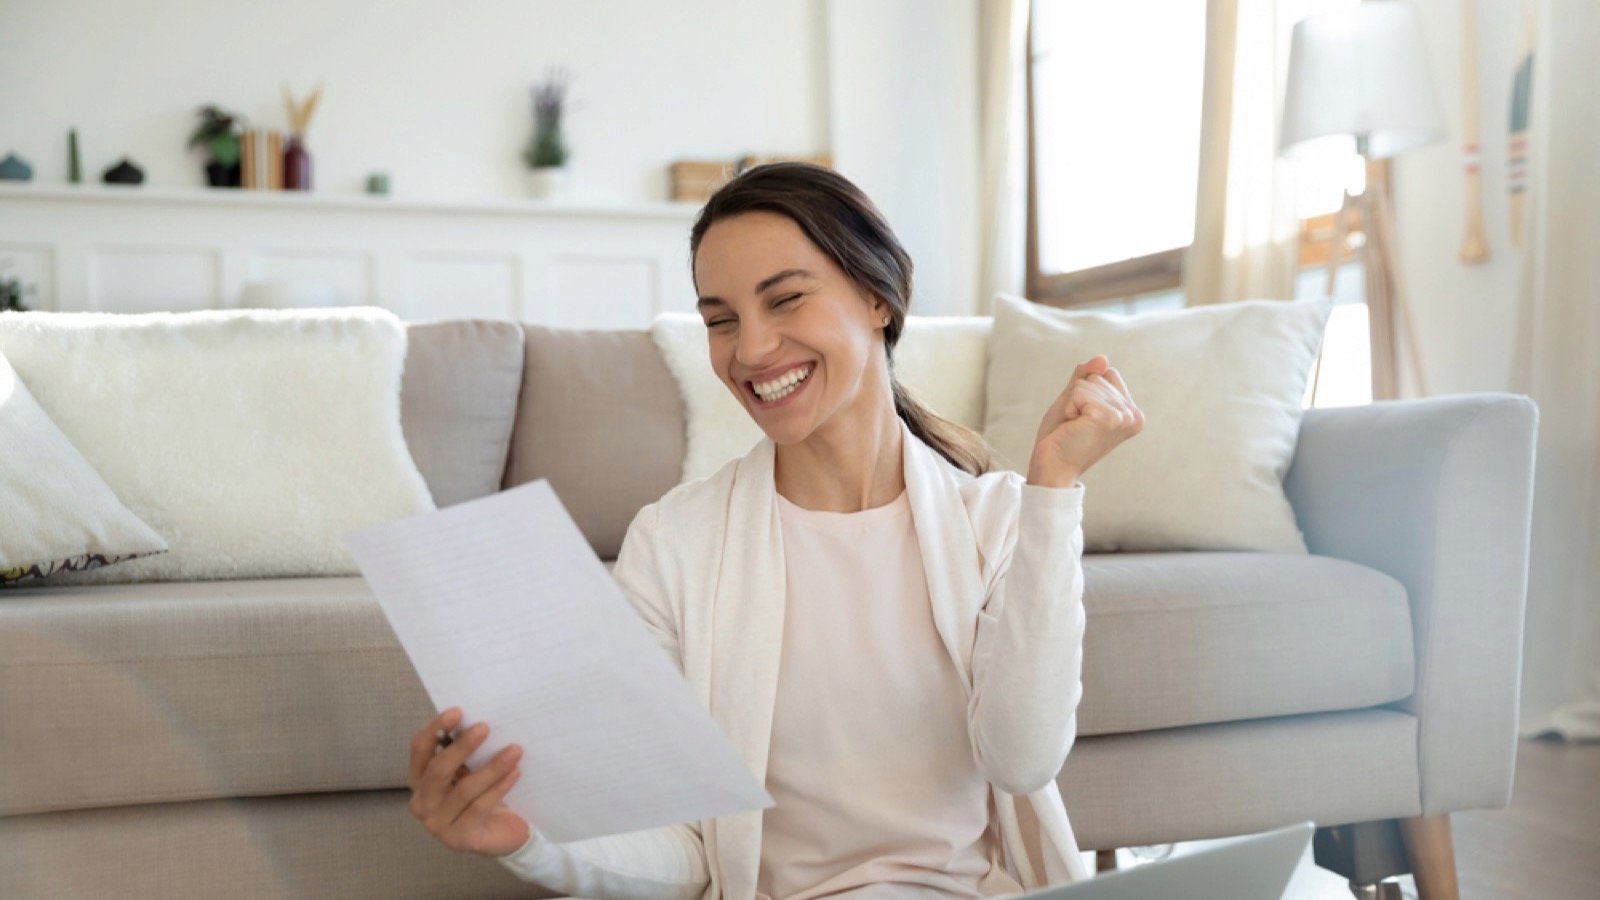 <p>Tax season is here. With inflation still a factor, Americans want to get as much money as possible back into their pockets. Luckily, there are some professional tips to help us educate ourselves on how to do this. Take a look at these tips before you file your 2023 taxes.</p>